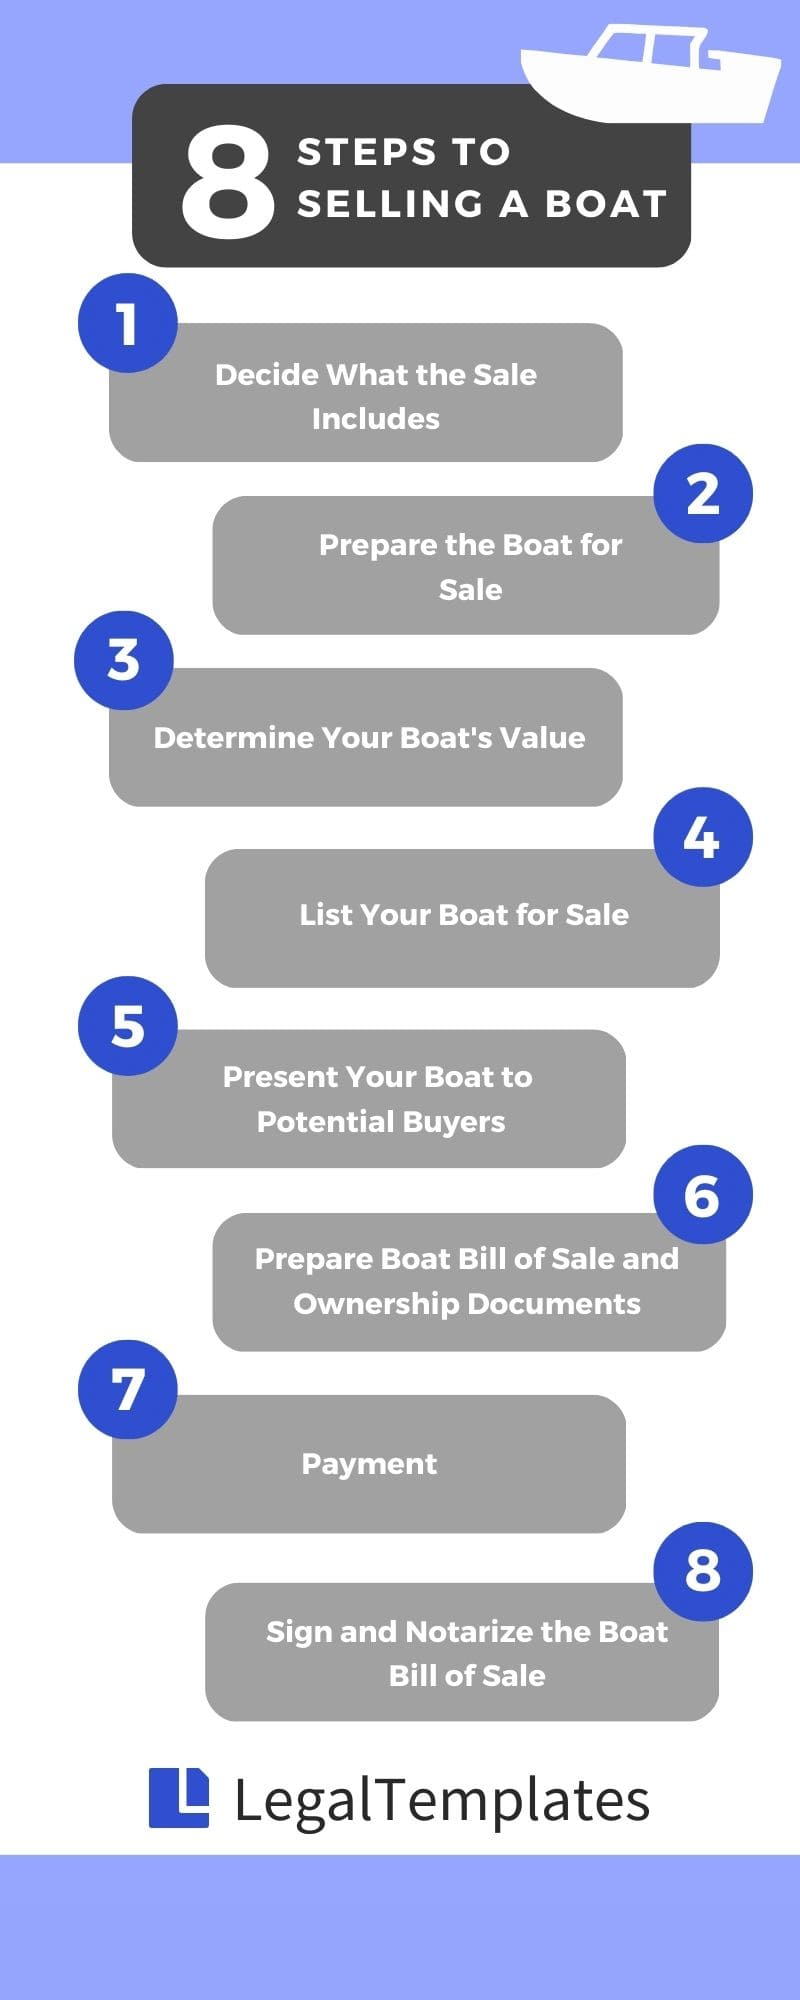 8 steps to selling a boat infographic